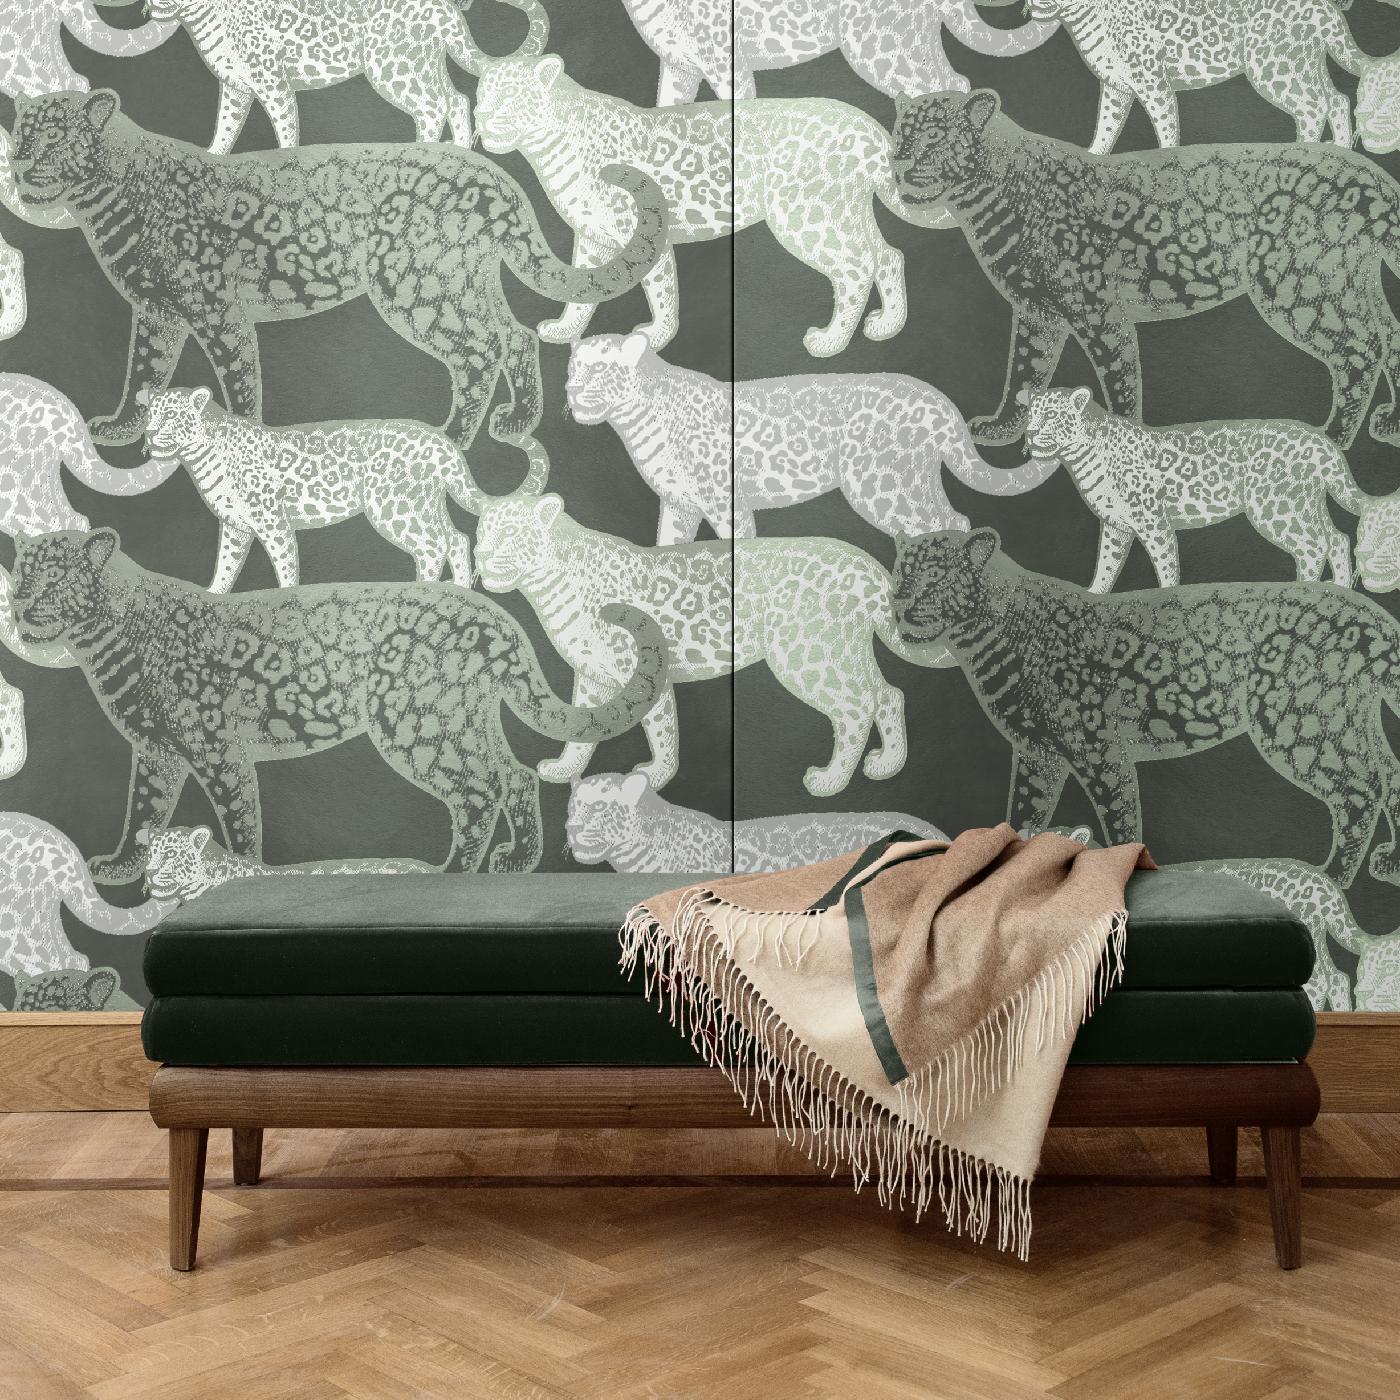 A mesmerizing combination of contrasting colors and naturalistic style creates this bold and sophisticated wall covering, depicting walking leopards of two different sizes. A dream-like scene that will make a statement in any modern interior, this